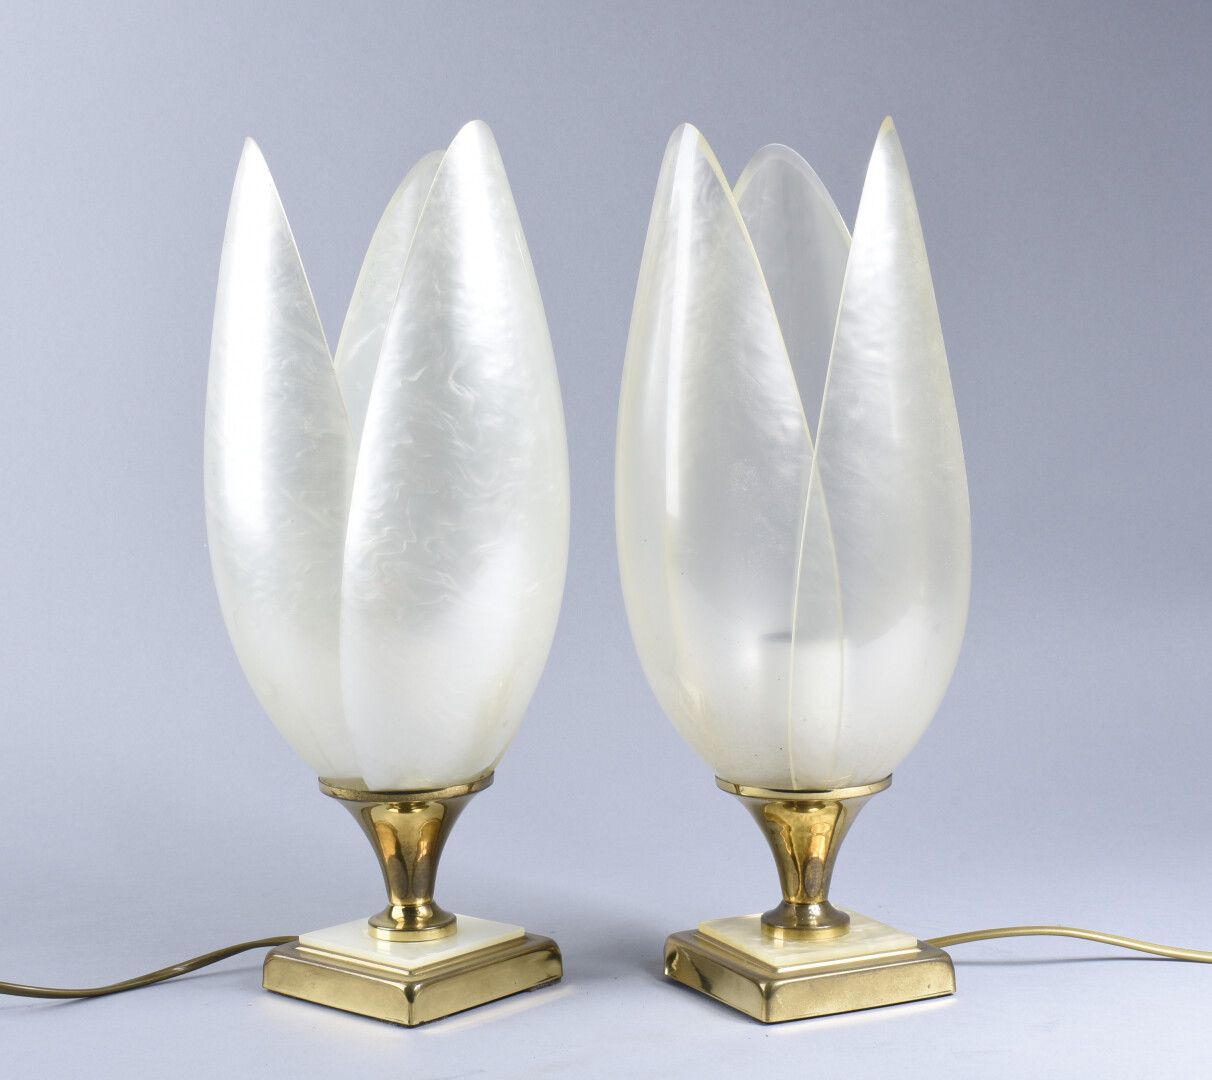 Null ROUGIER Laurent (XXth-XXIth Centuries)

Pair of table lamps model "Tulip". &hellip;